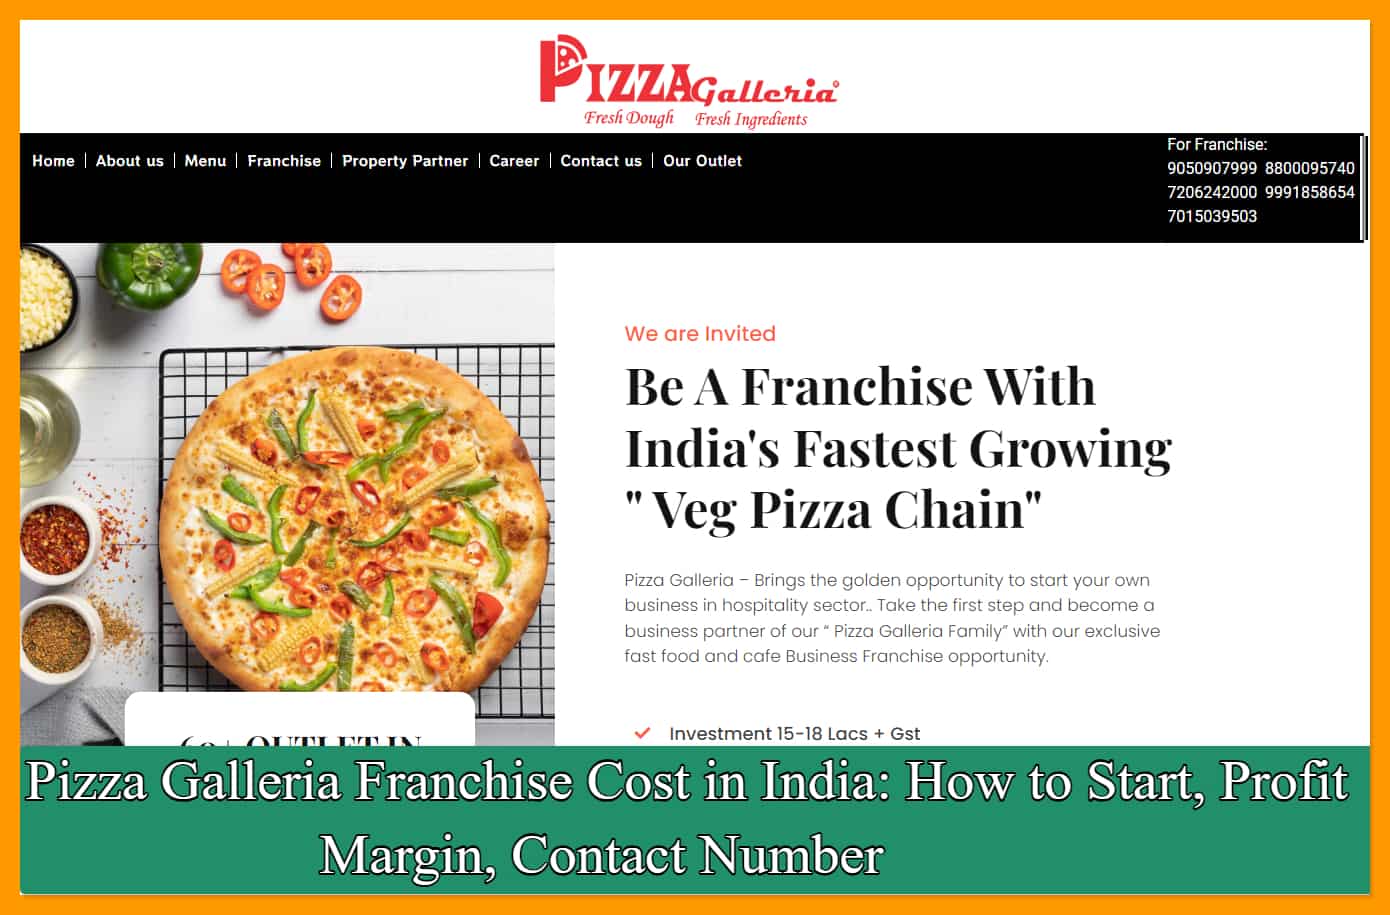 Pizza Galleria Franchise Cost in India: How to Start, Profit Margin, Contact Number